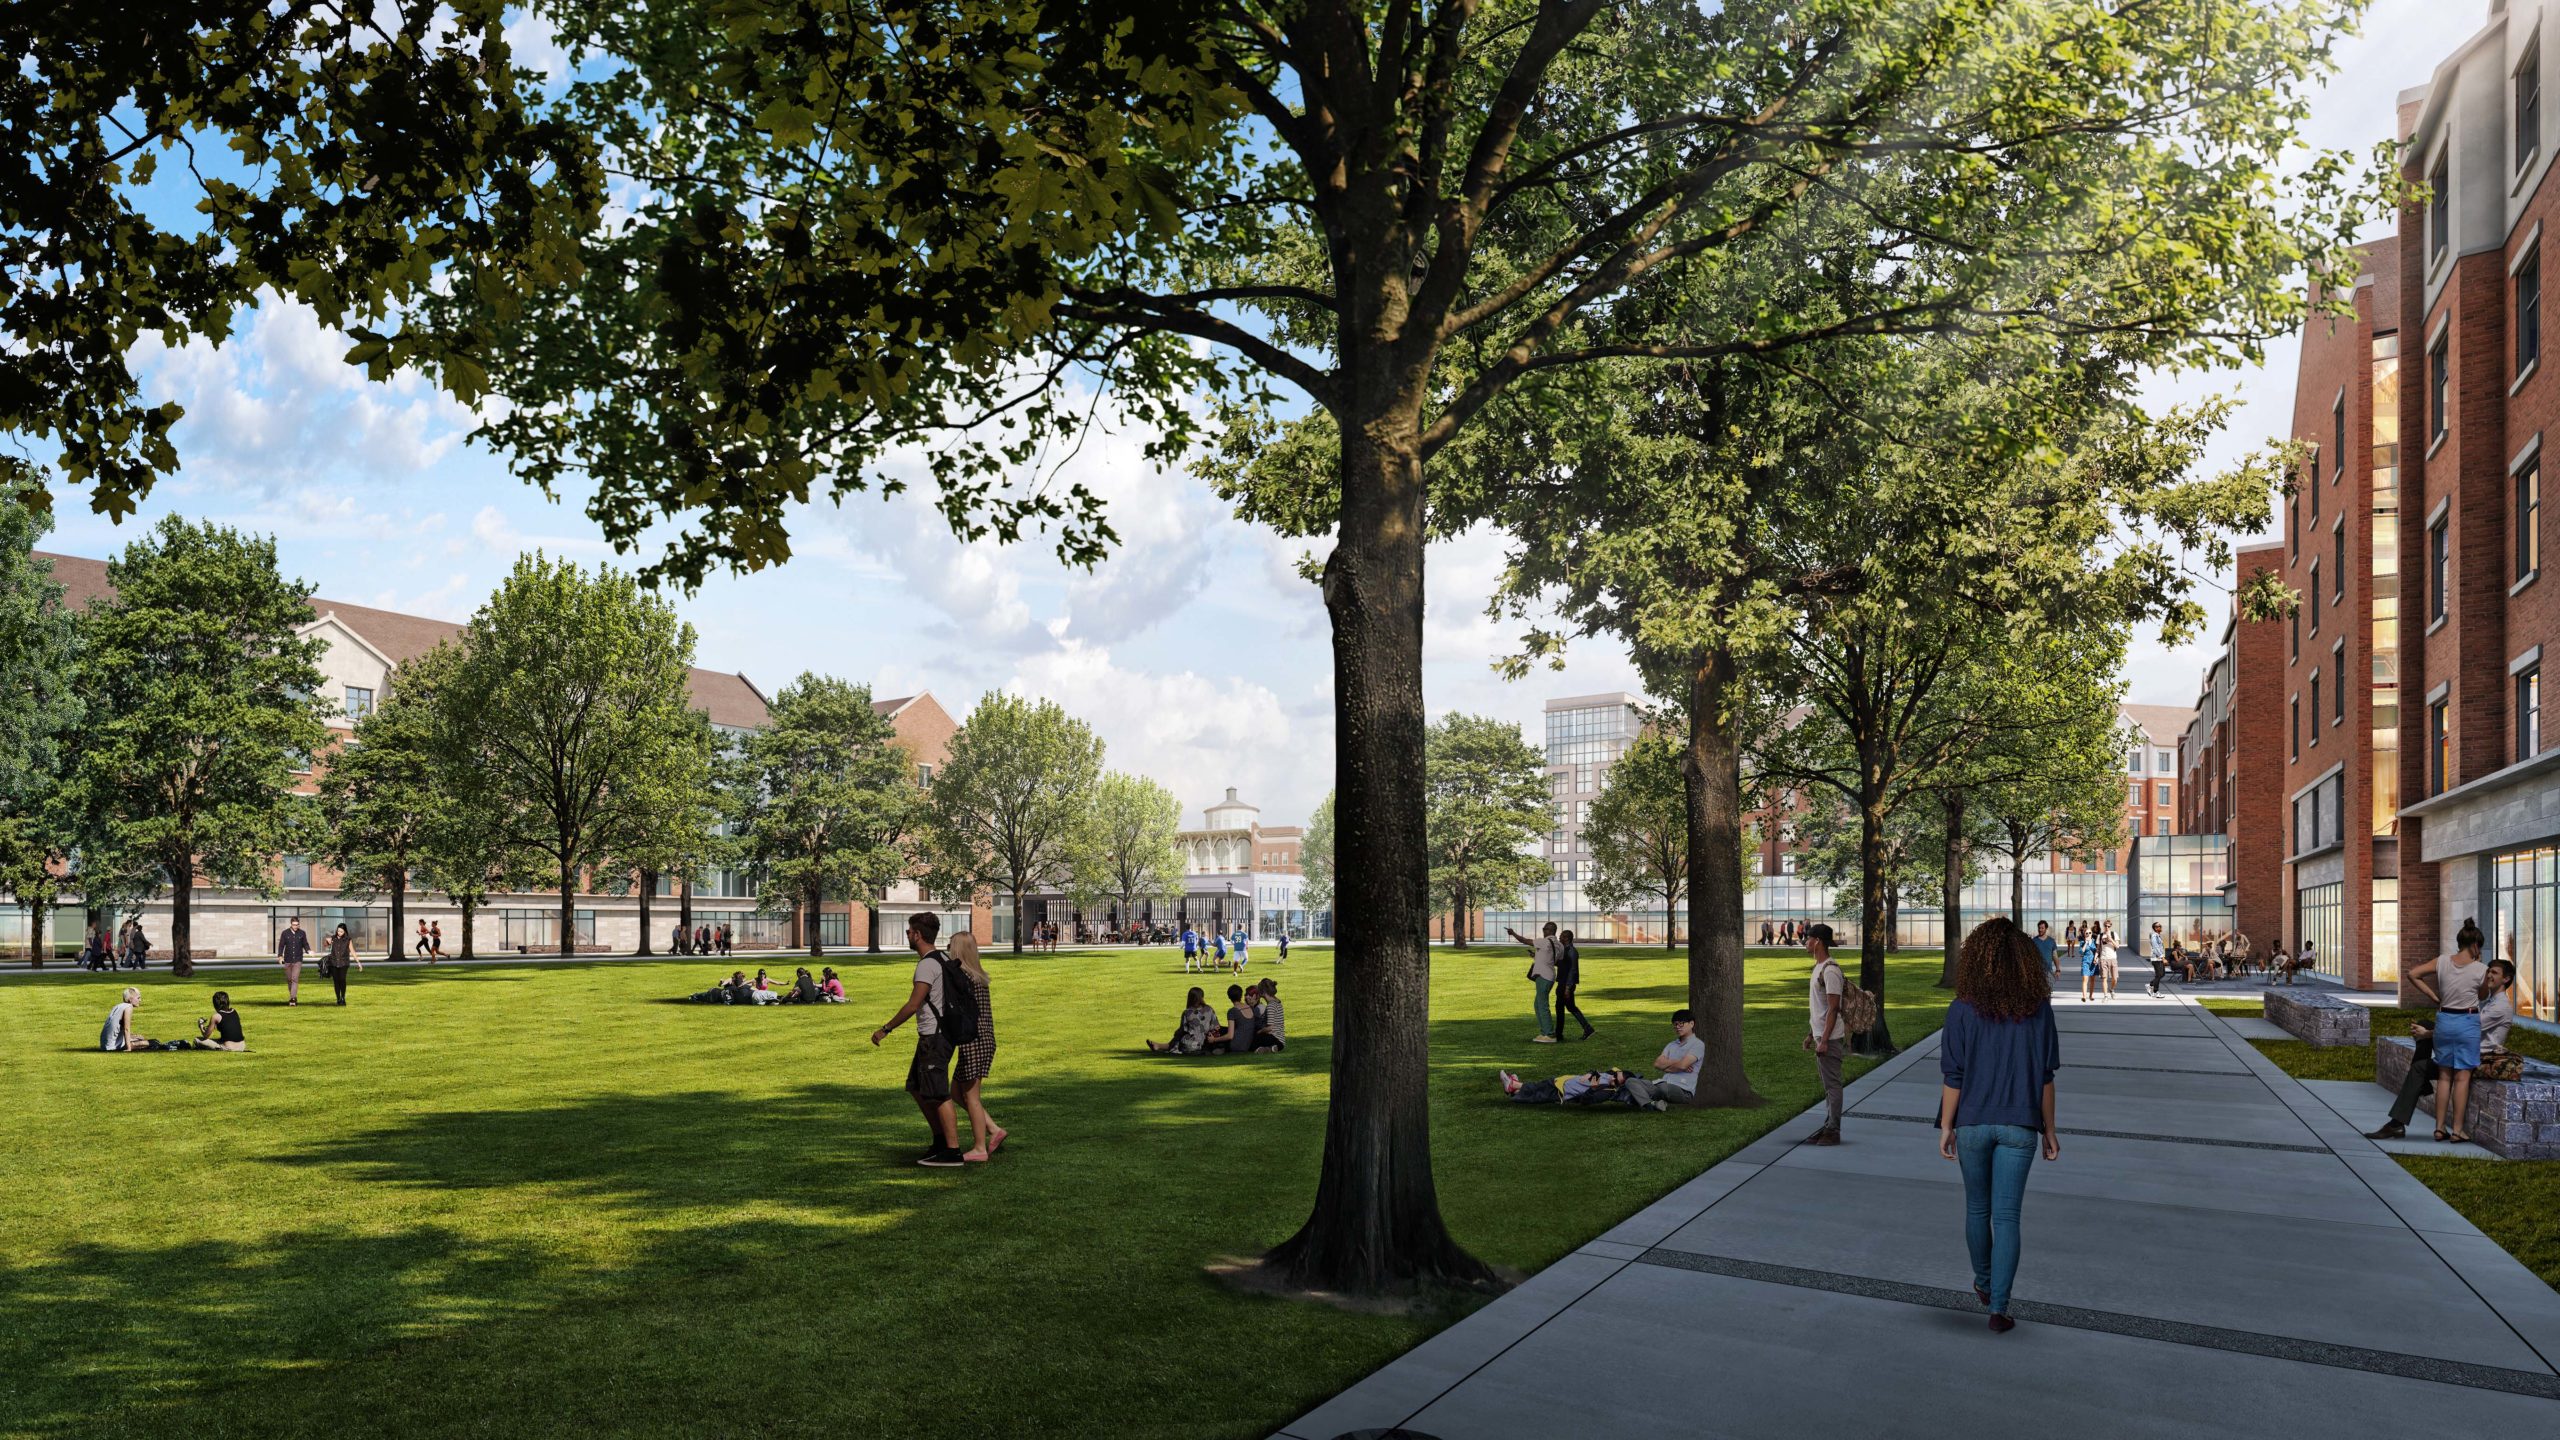 Rendering of students recreating on tree-lined campus quad